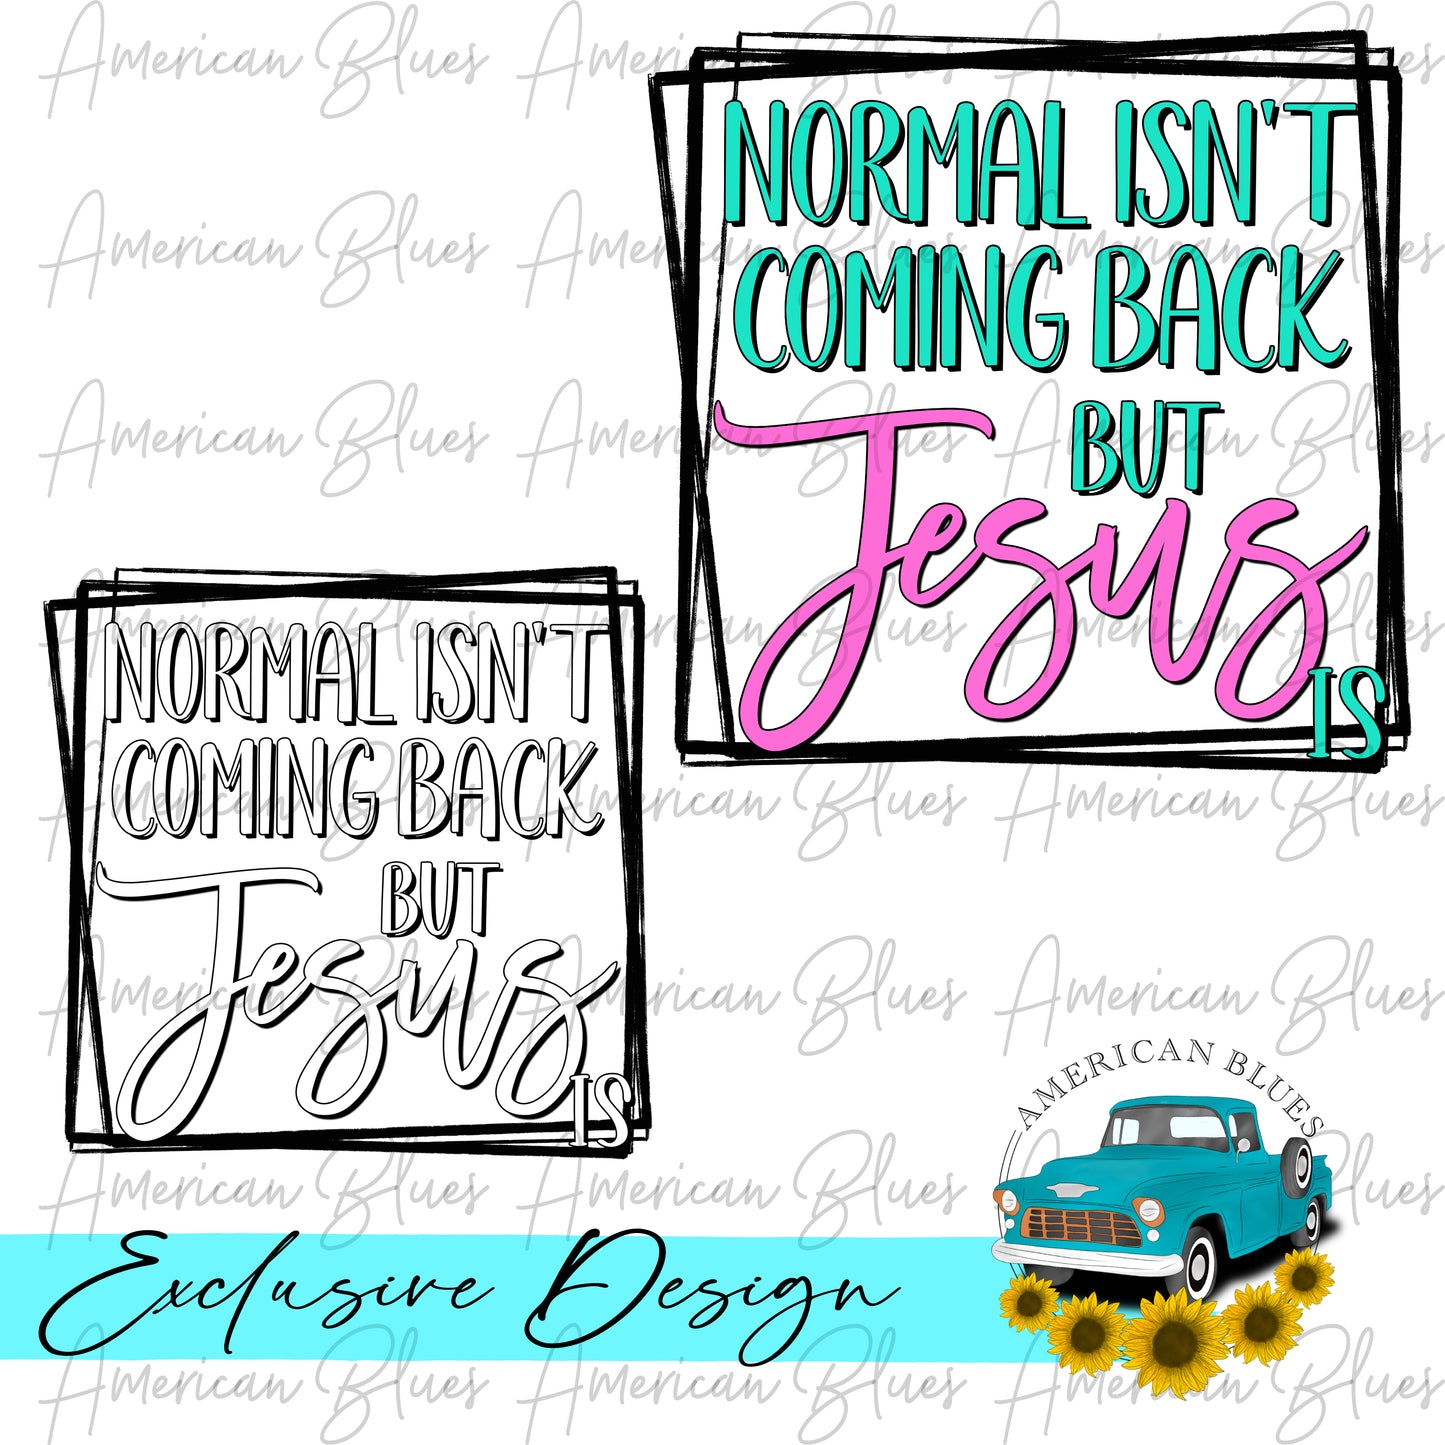 Normal isn't coming back but Jesus is